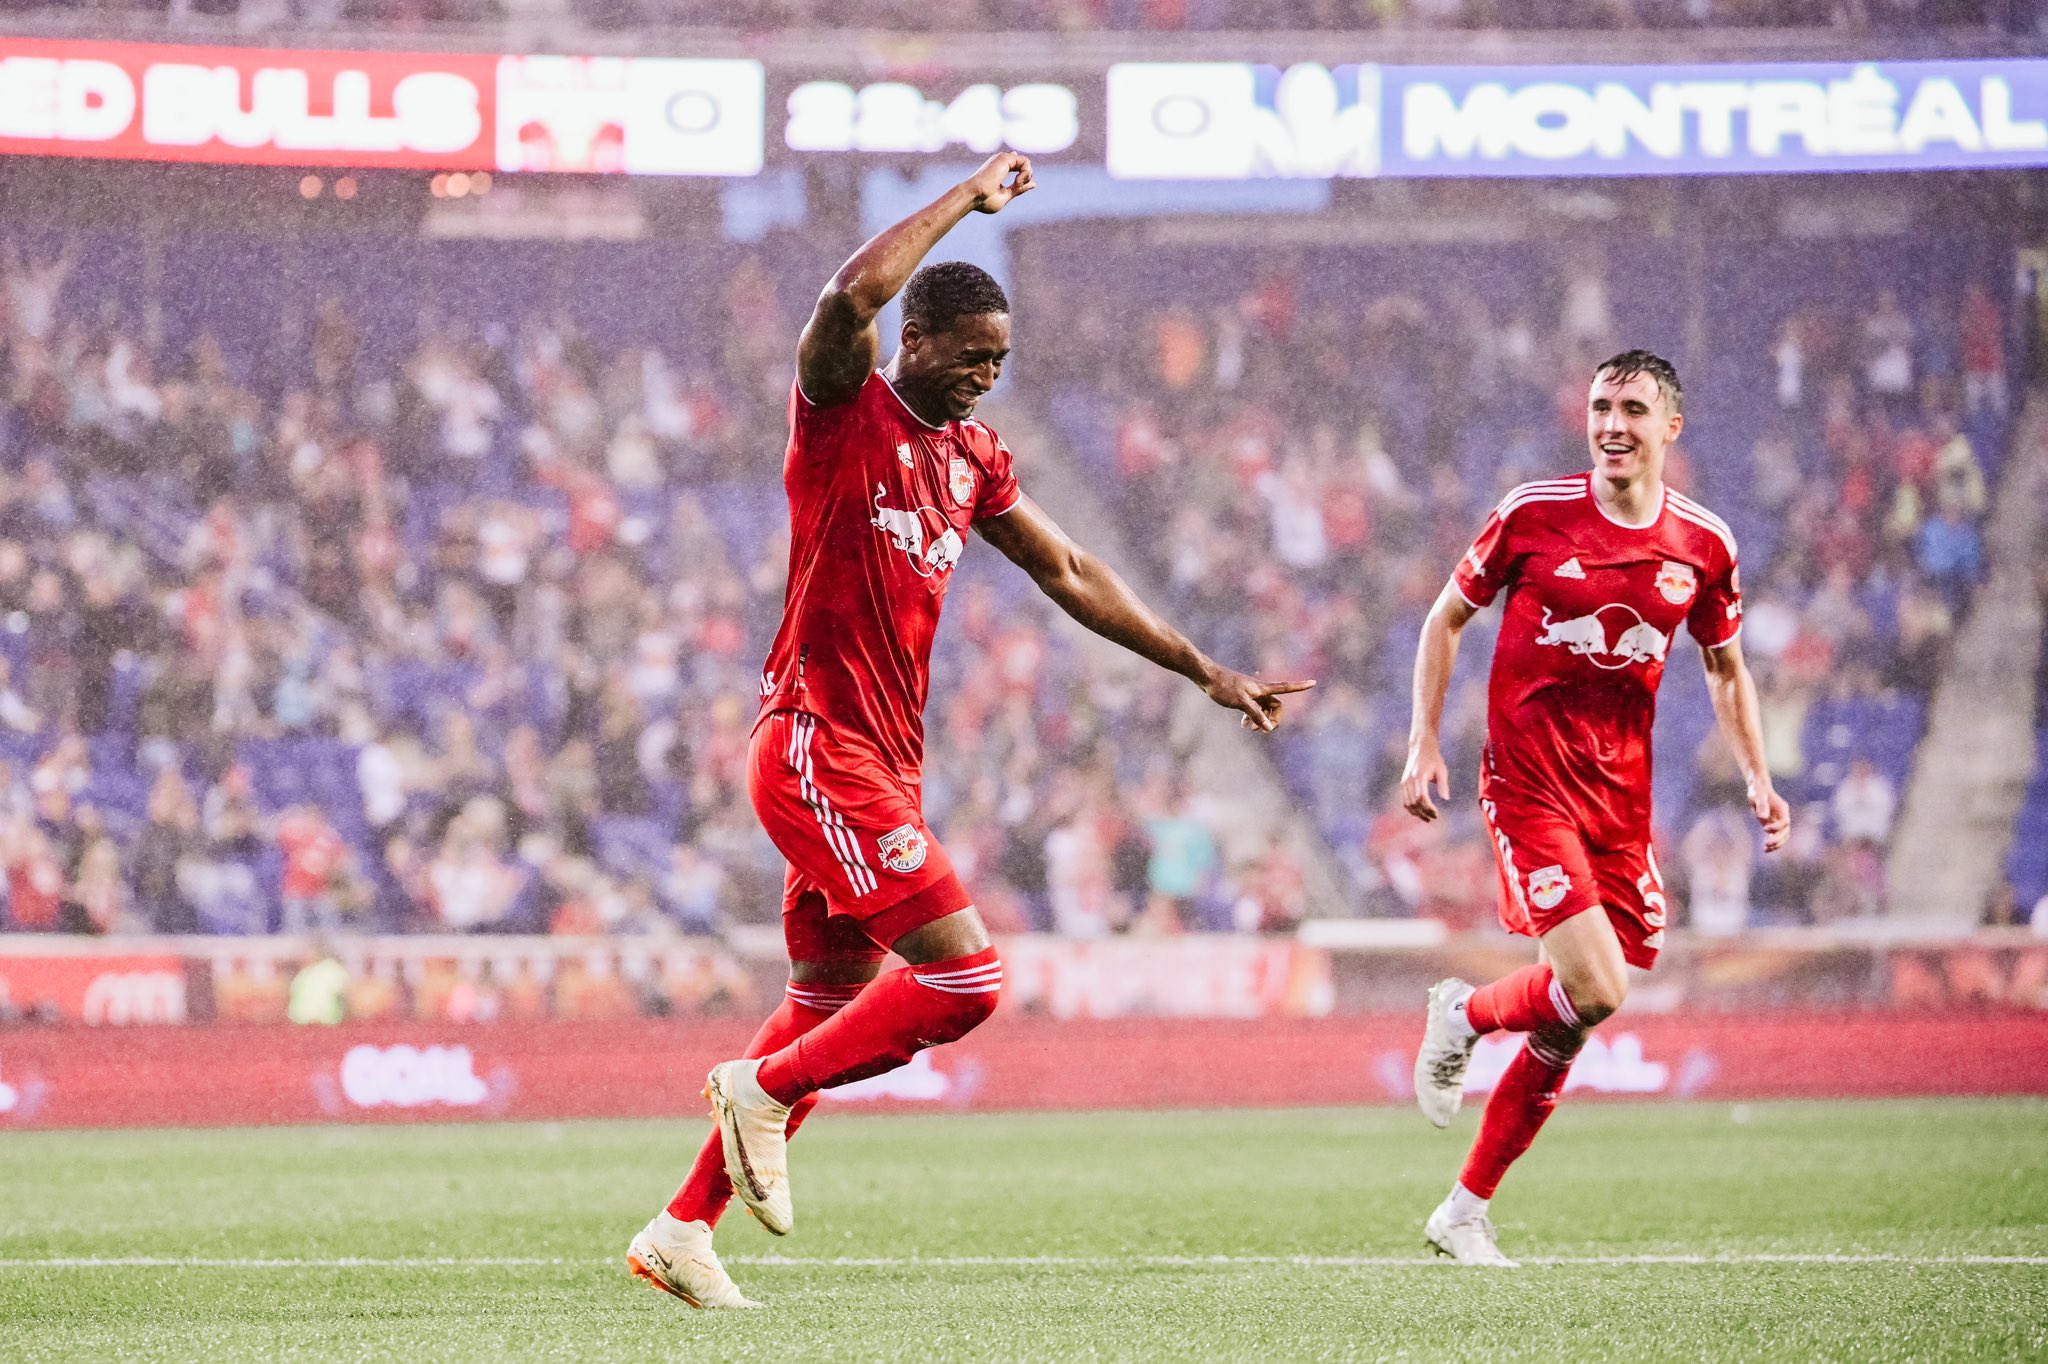 NY Red Bulls beat CF Montreal 2-1 after 3 goals in the 1st half